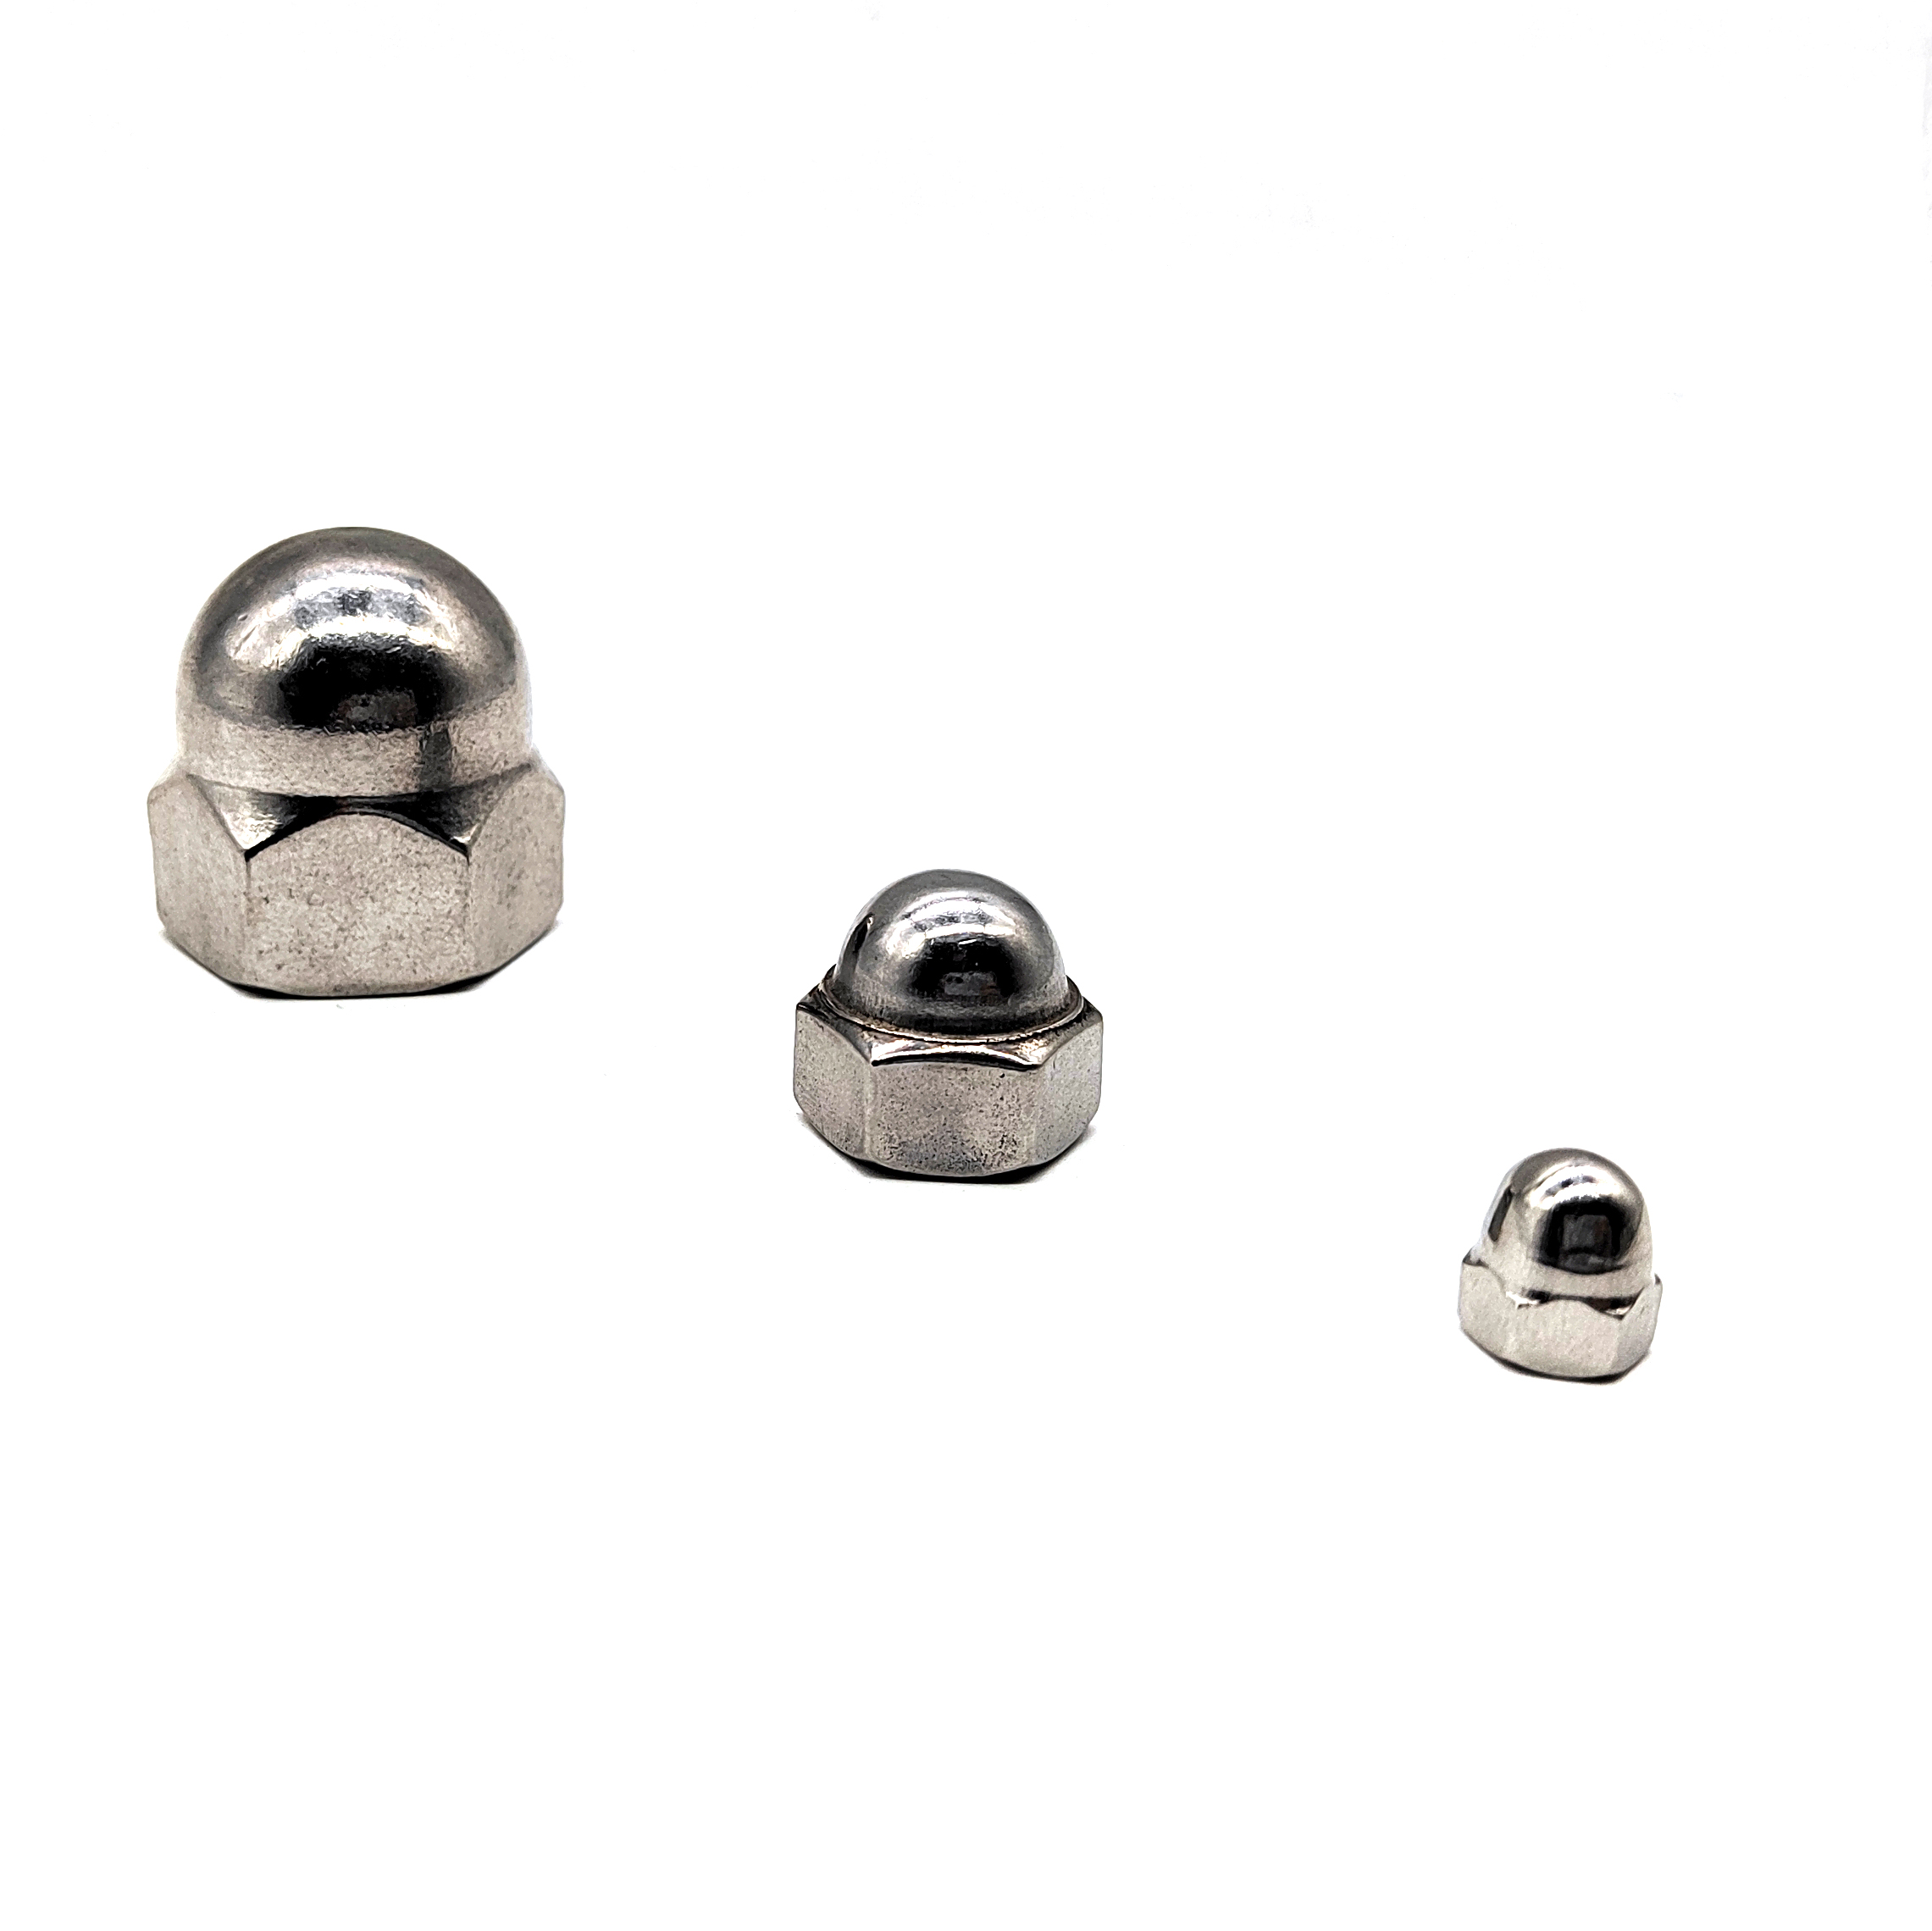 Stainless Steel 304 316 M4 M6 M10 Hex Cap Nuts - Buy Stainless Steel 304  316 M4 M6 M10 Hex Cap Nuts, m6 cap nut, acorn cap nuts Product on hex bolt